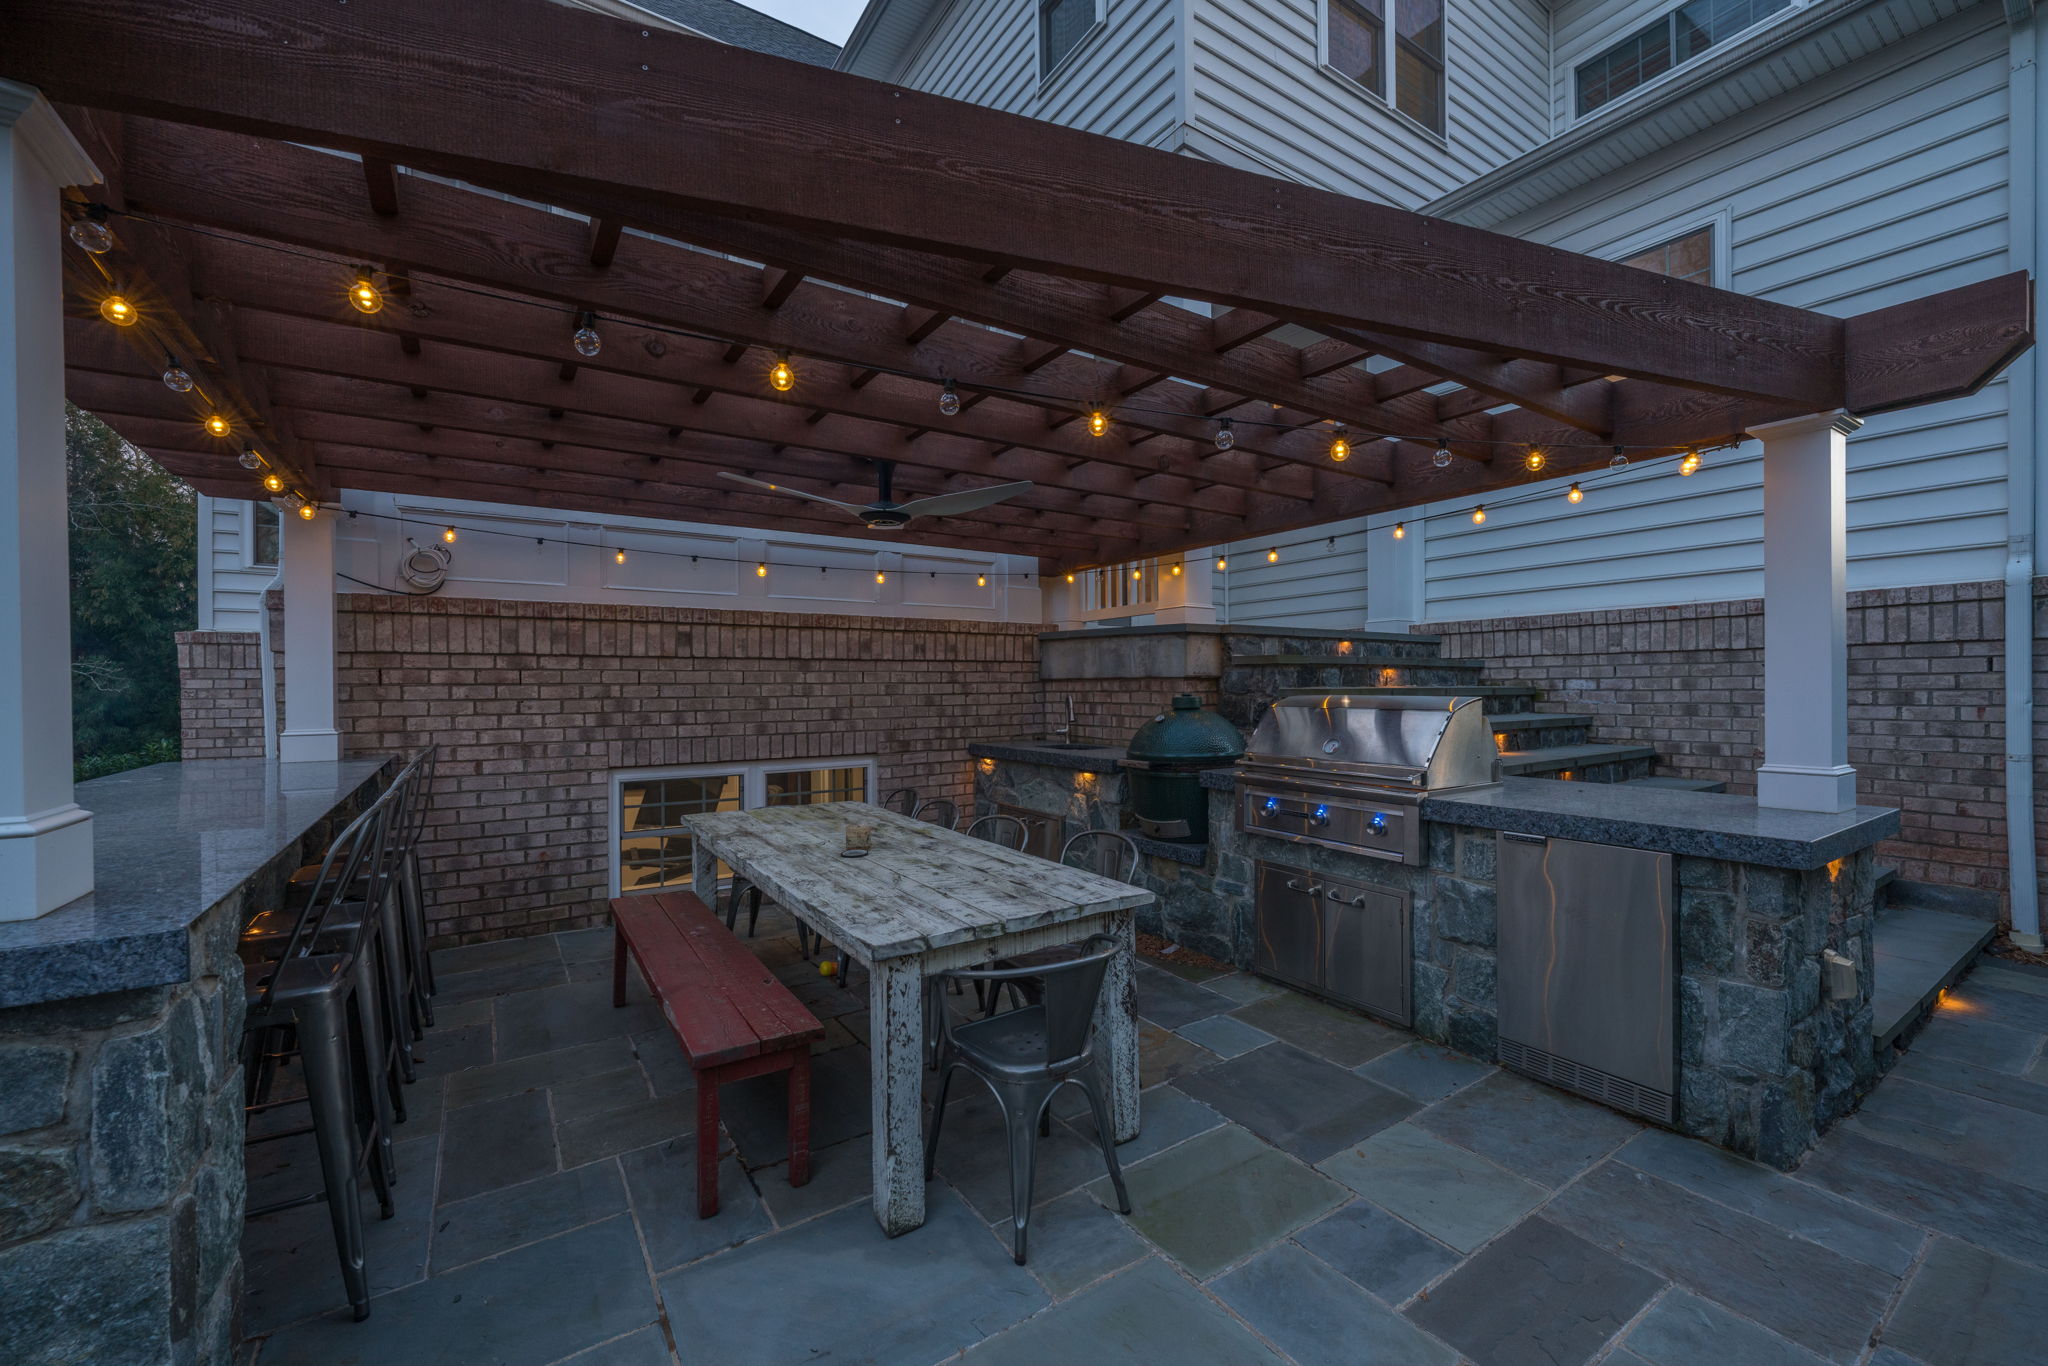 Outdoor Kitchen with grill, green egg and more!